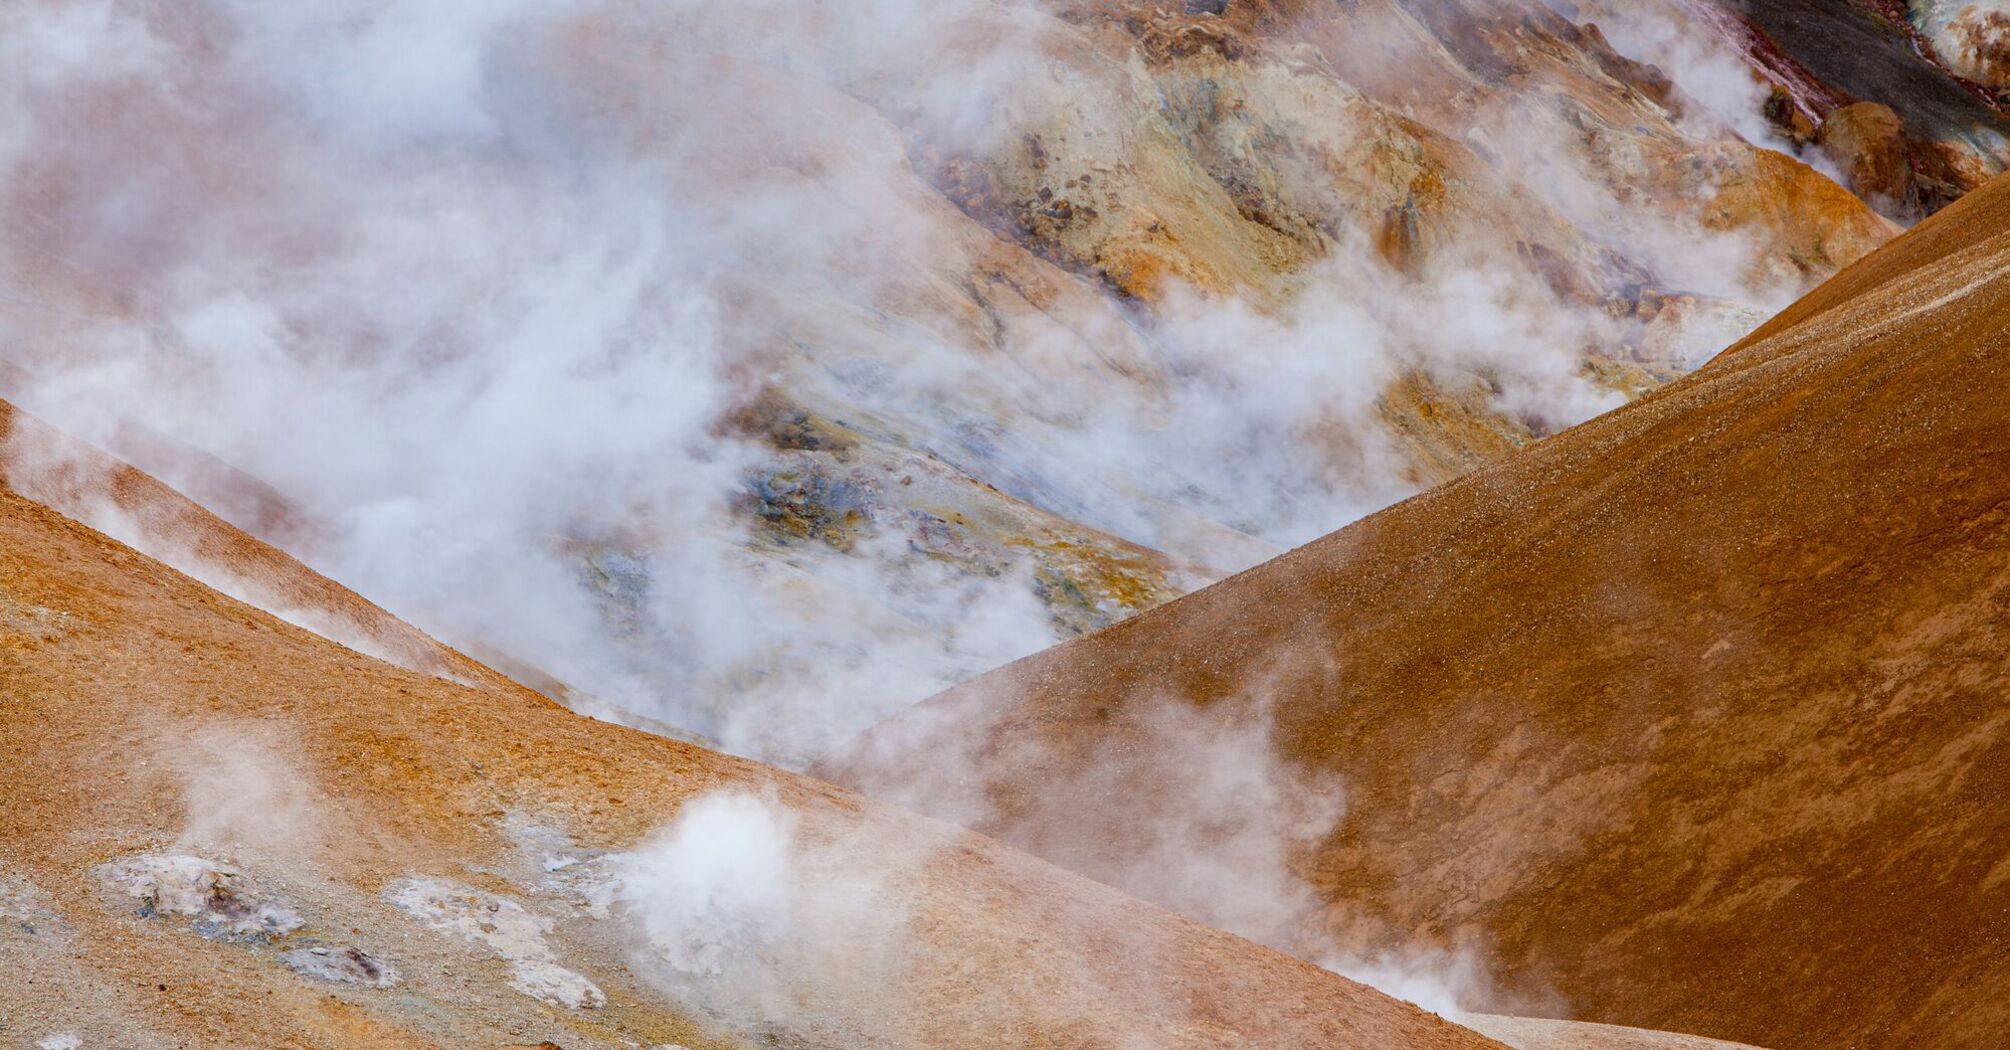 Steaming fumaroles in the volcanic active area of Kerlingarfjöll in central Iceland